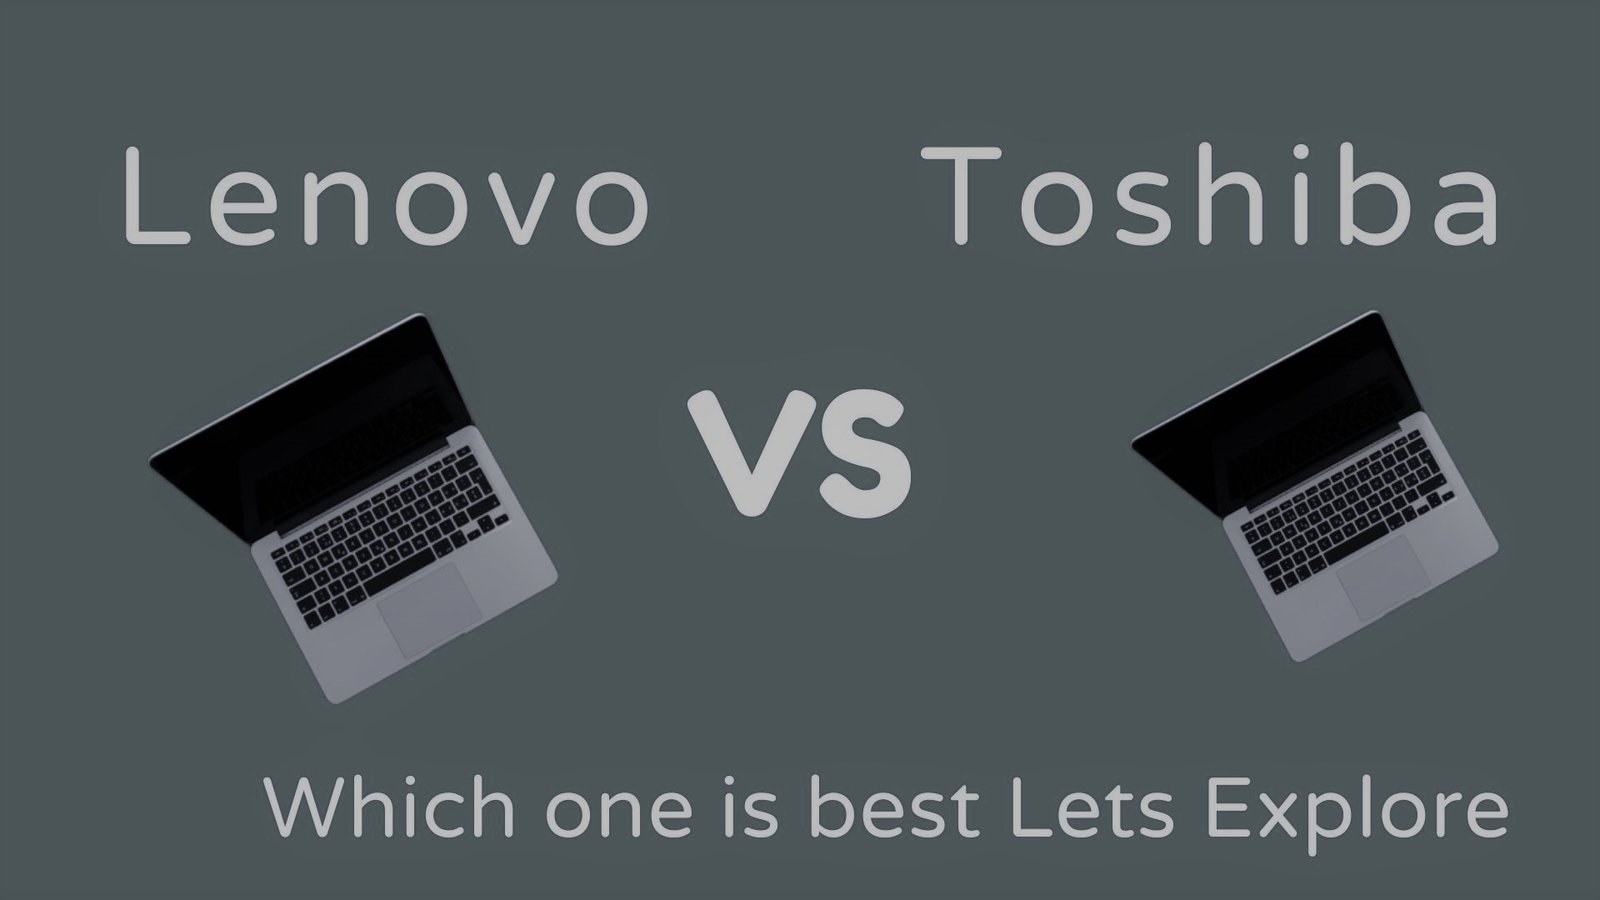 Lenovo vs Toshiba Which one is the best